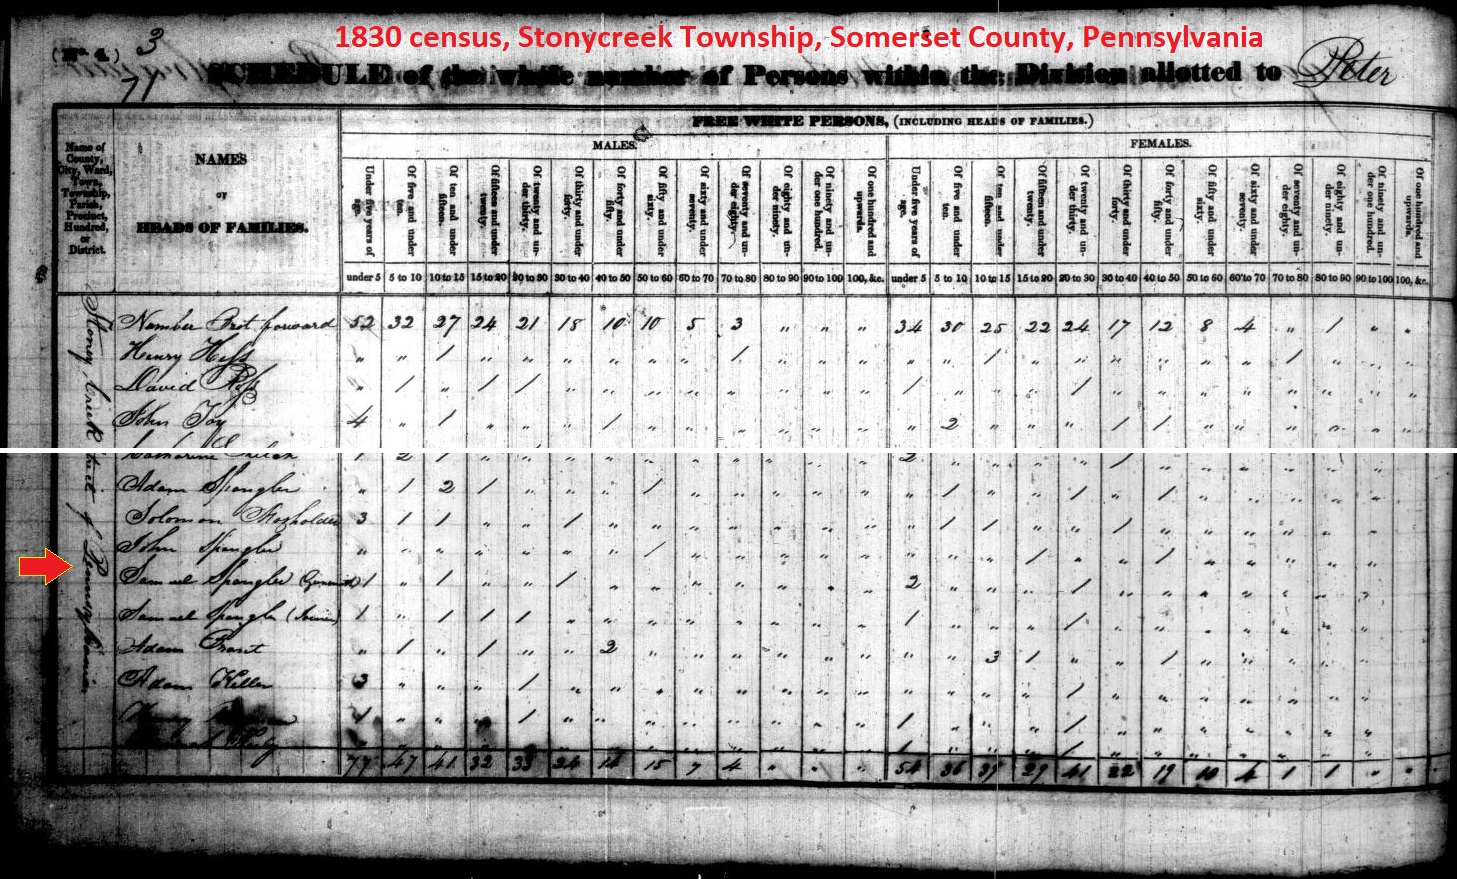 The gunsmith Samuel Spangler in the 1830 census of Stoneycreek Township, Somerset County, Pennsylvania.